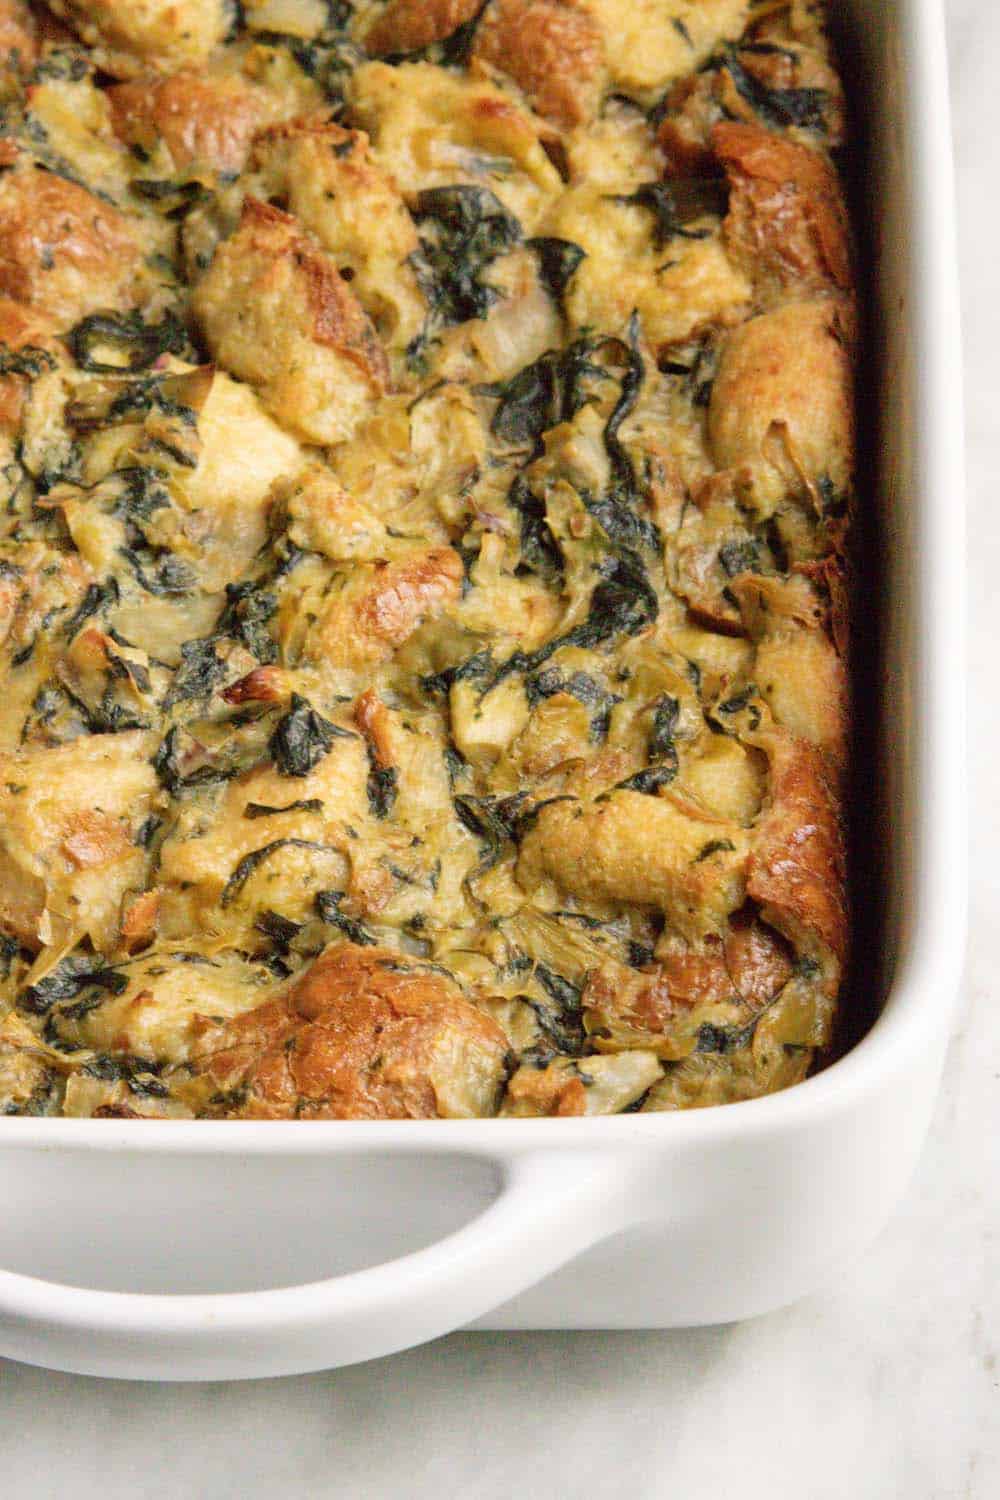 How To Make The Best Spinach And Baby Artichoke Bread Pudding Recipe